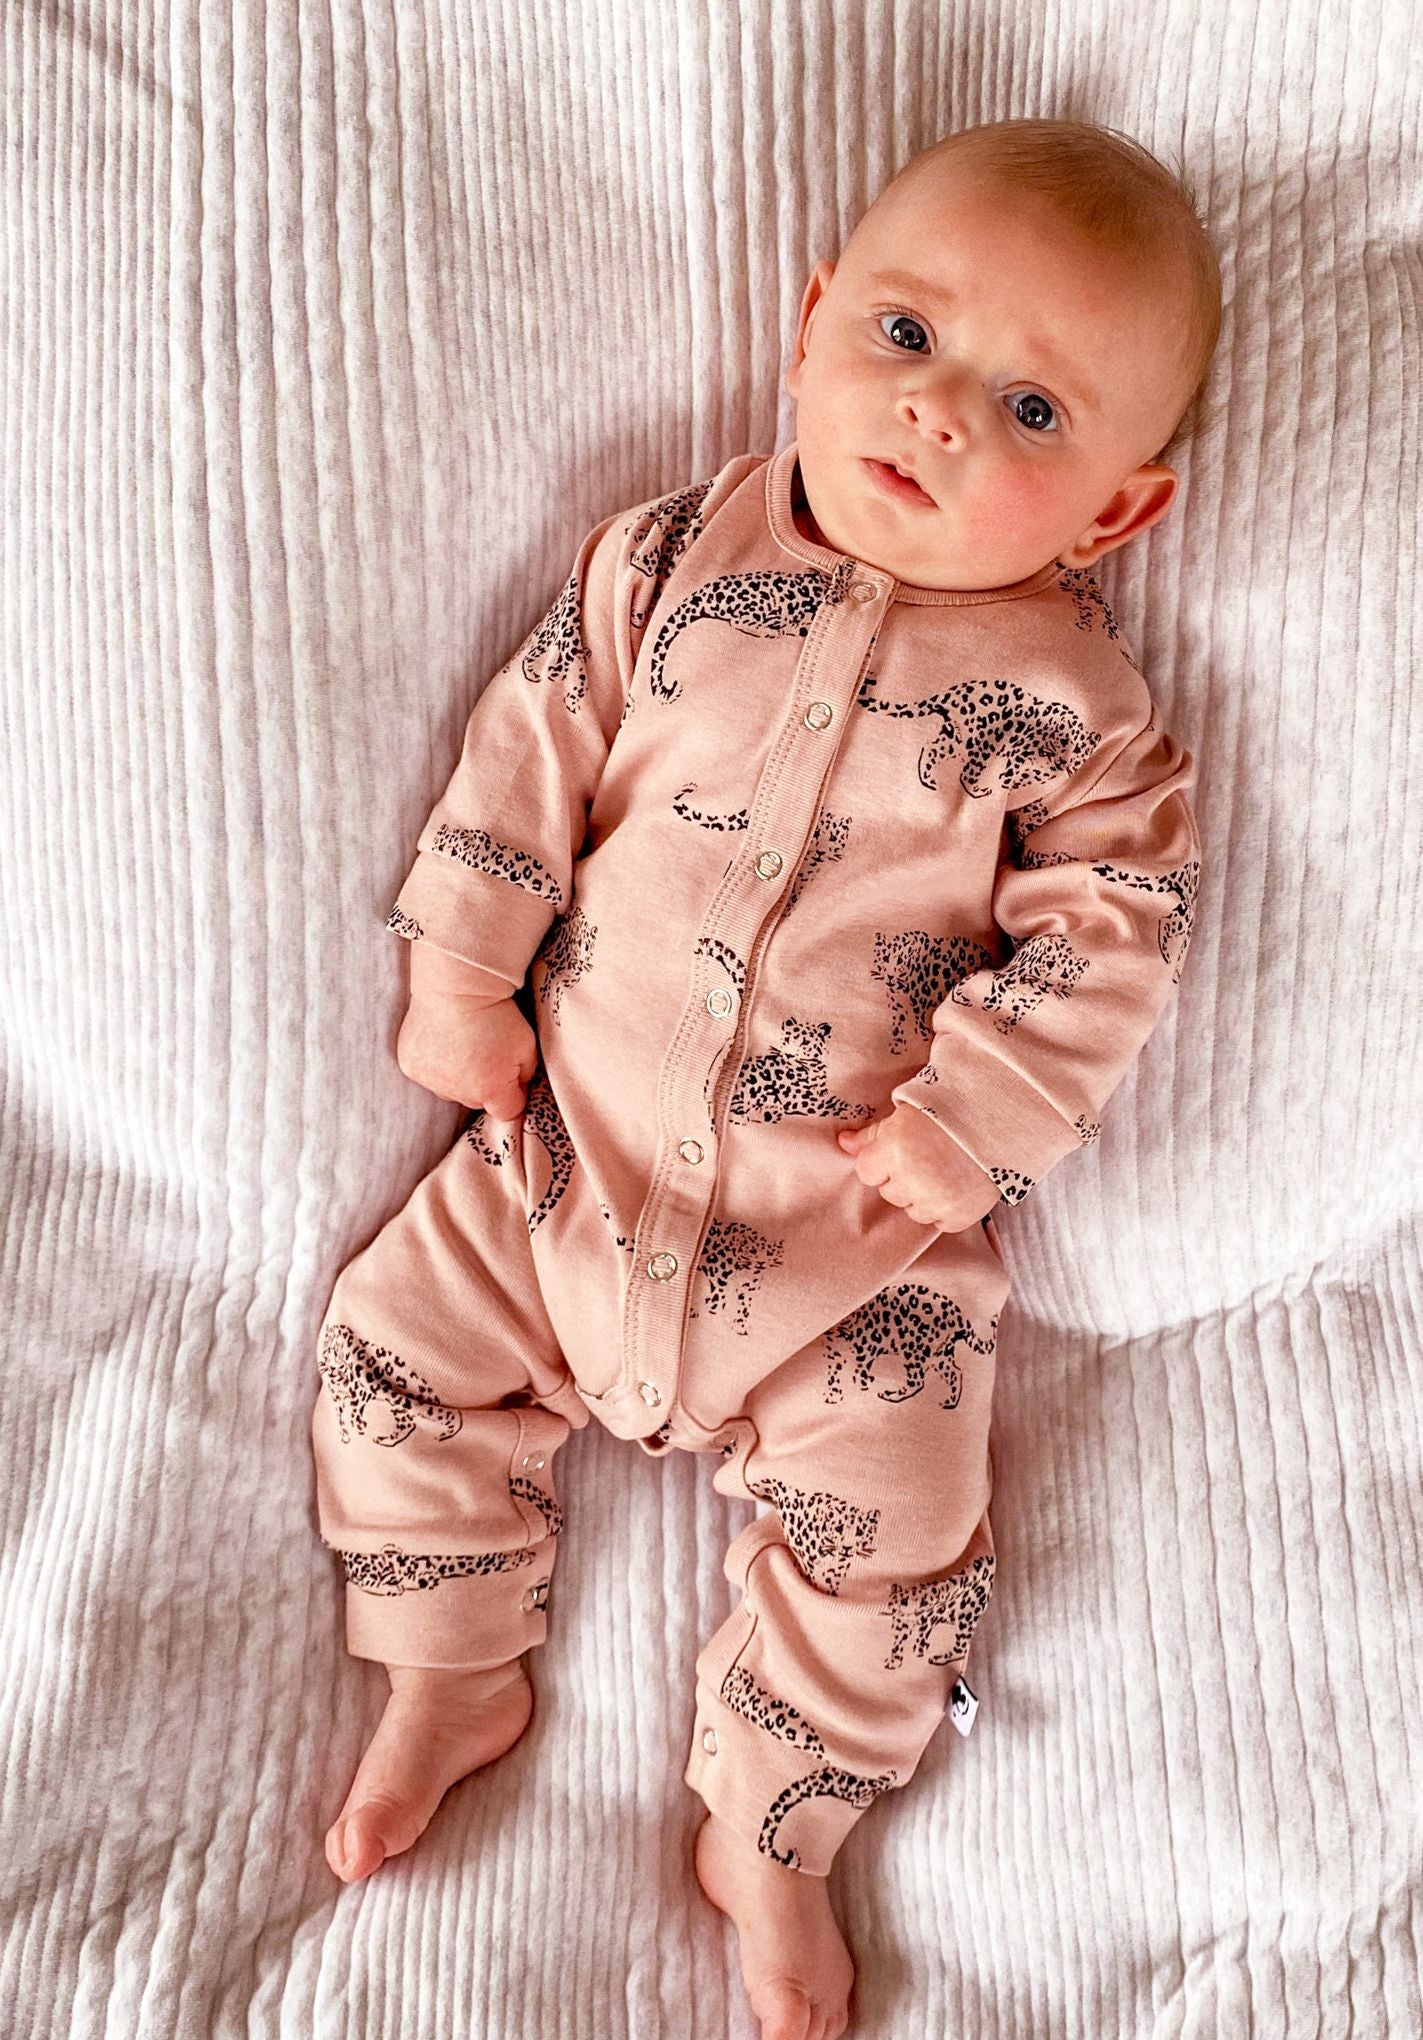 Lifestyle shot of a baby wearing the romper and lying on a white blanket.